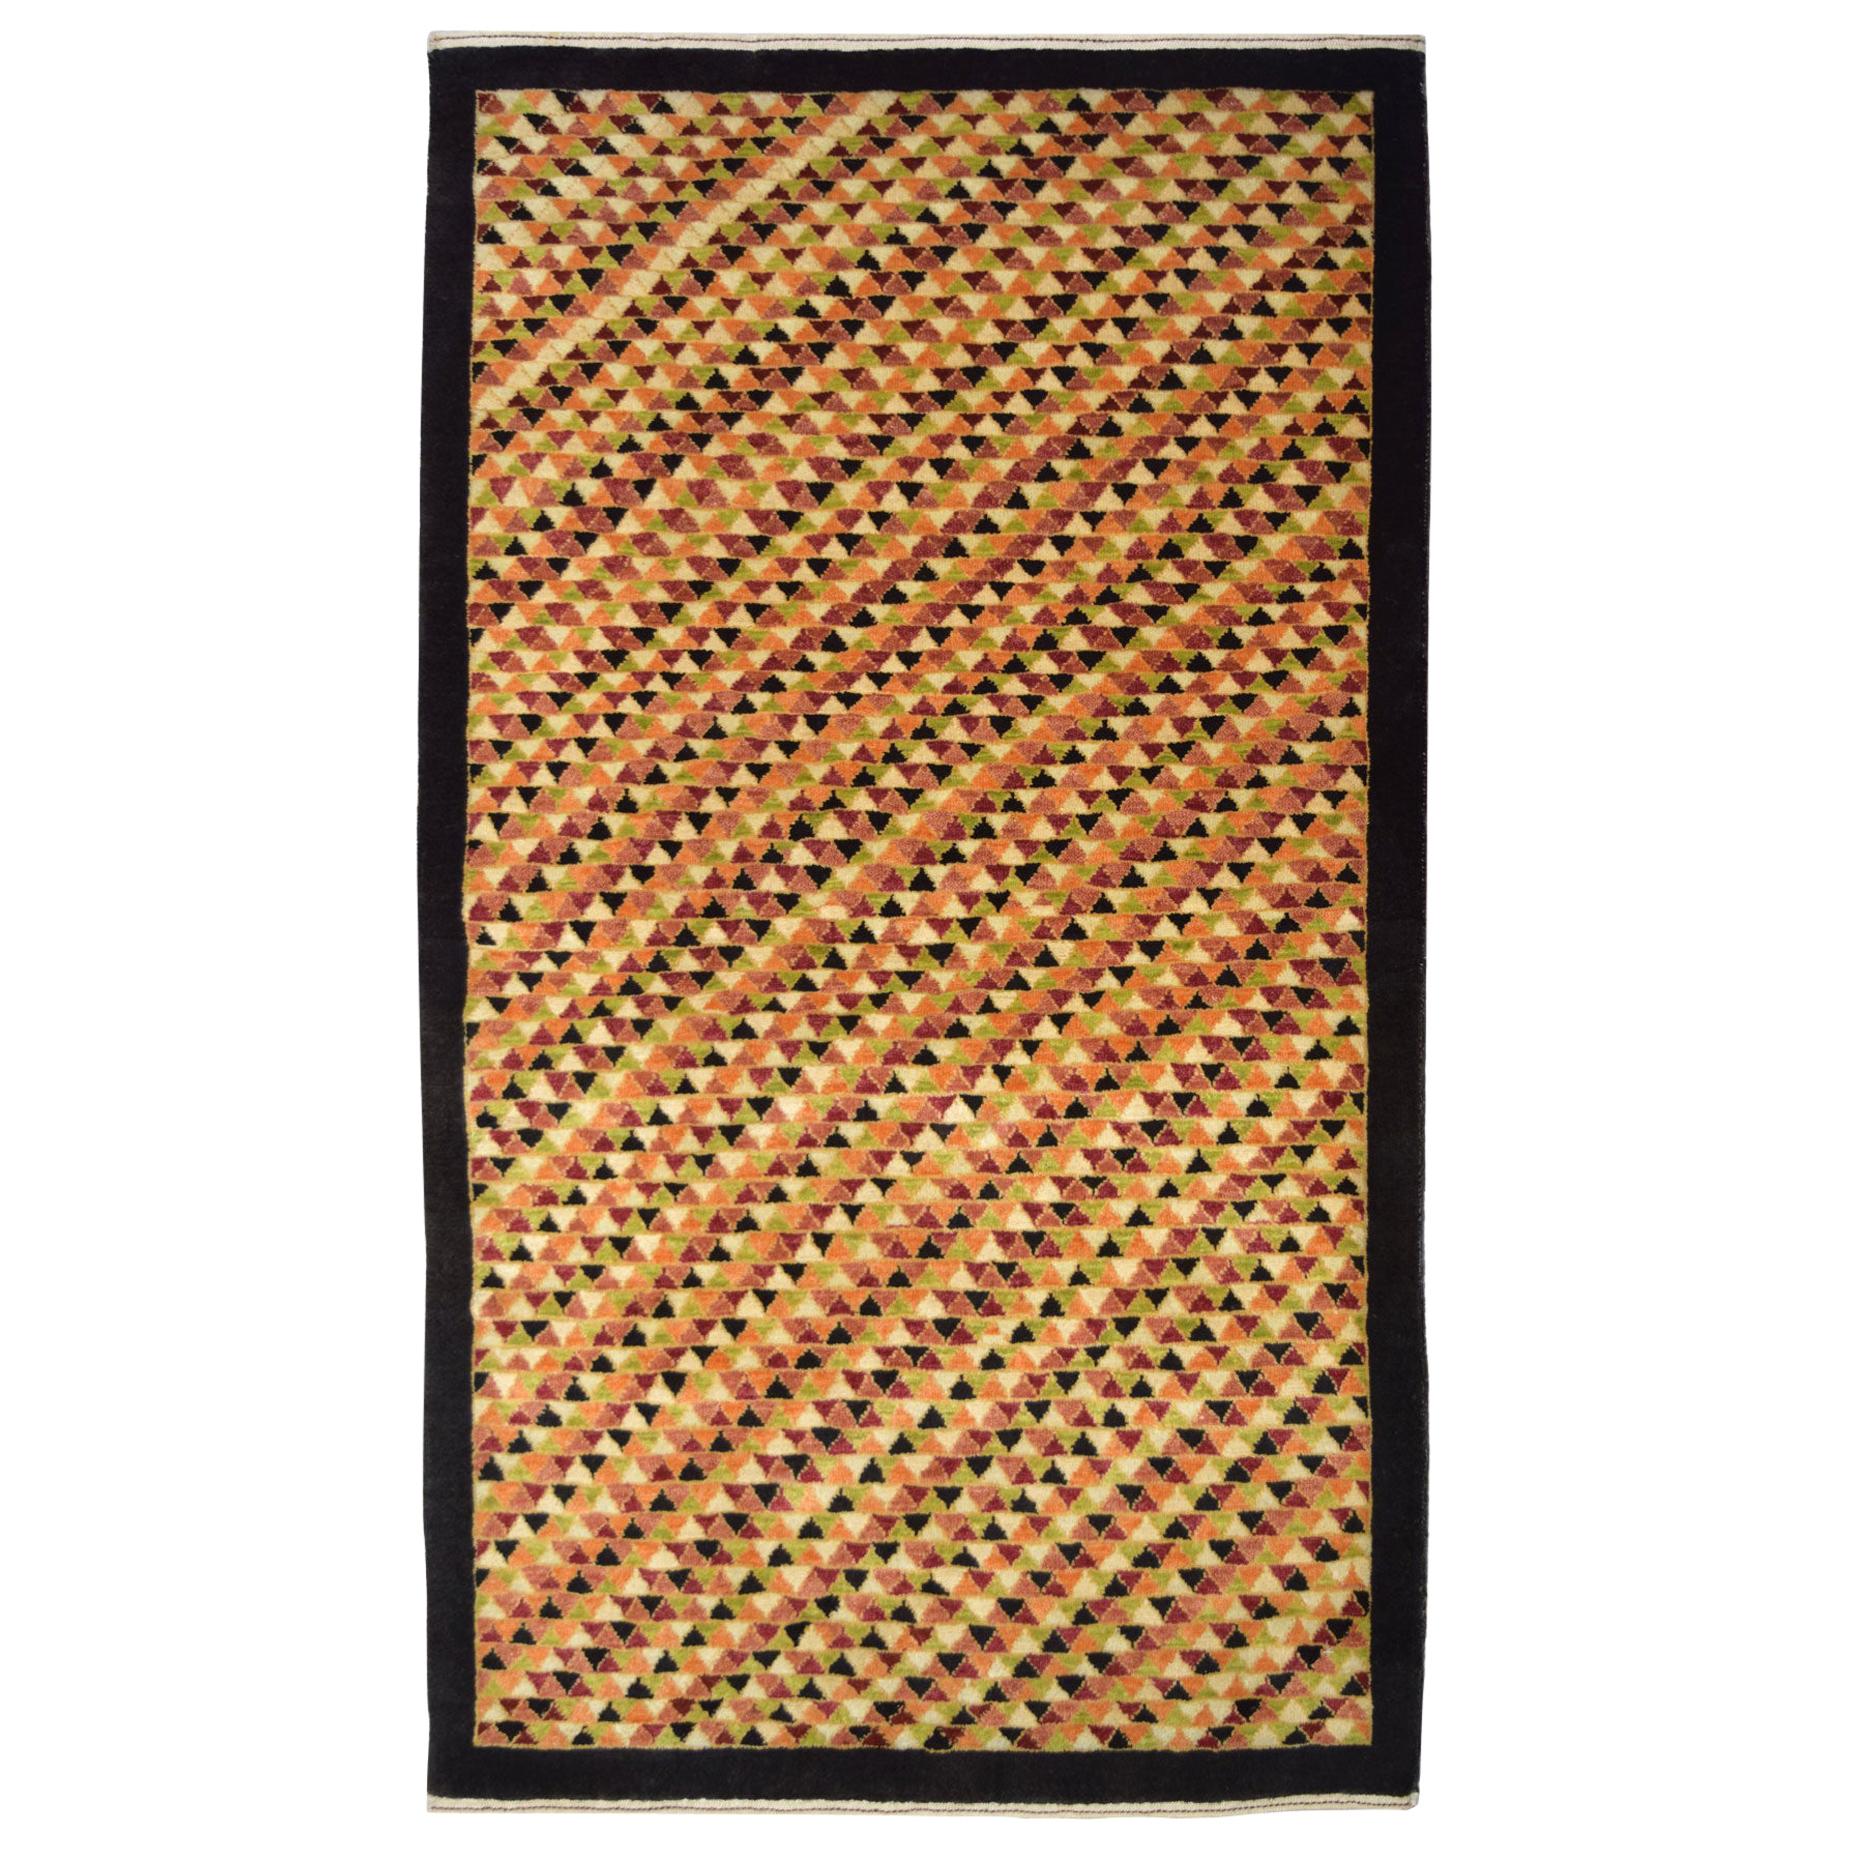 Orley Shabahang Contemporary Persian Ferehan Rug, Geometric, 3' x 5' For Sale